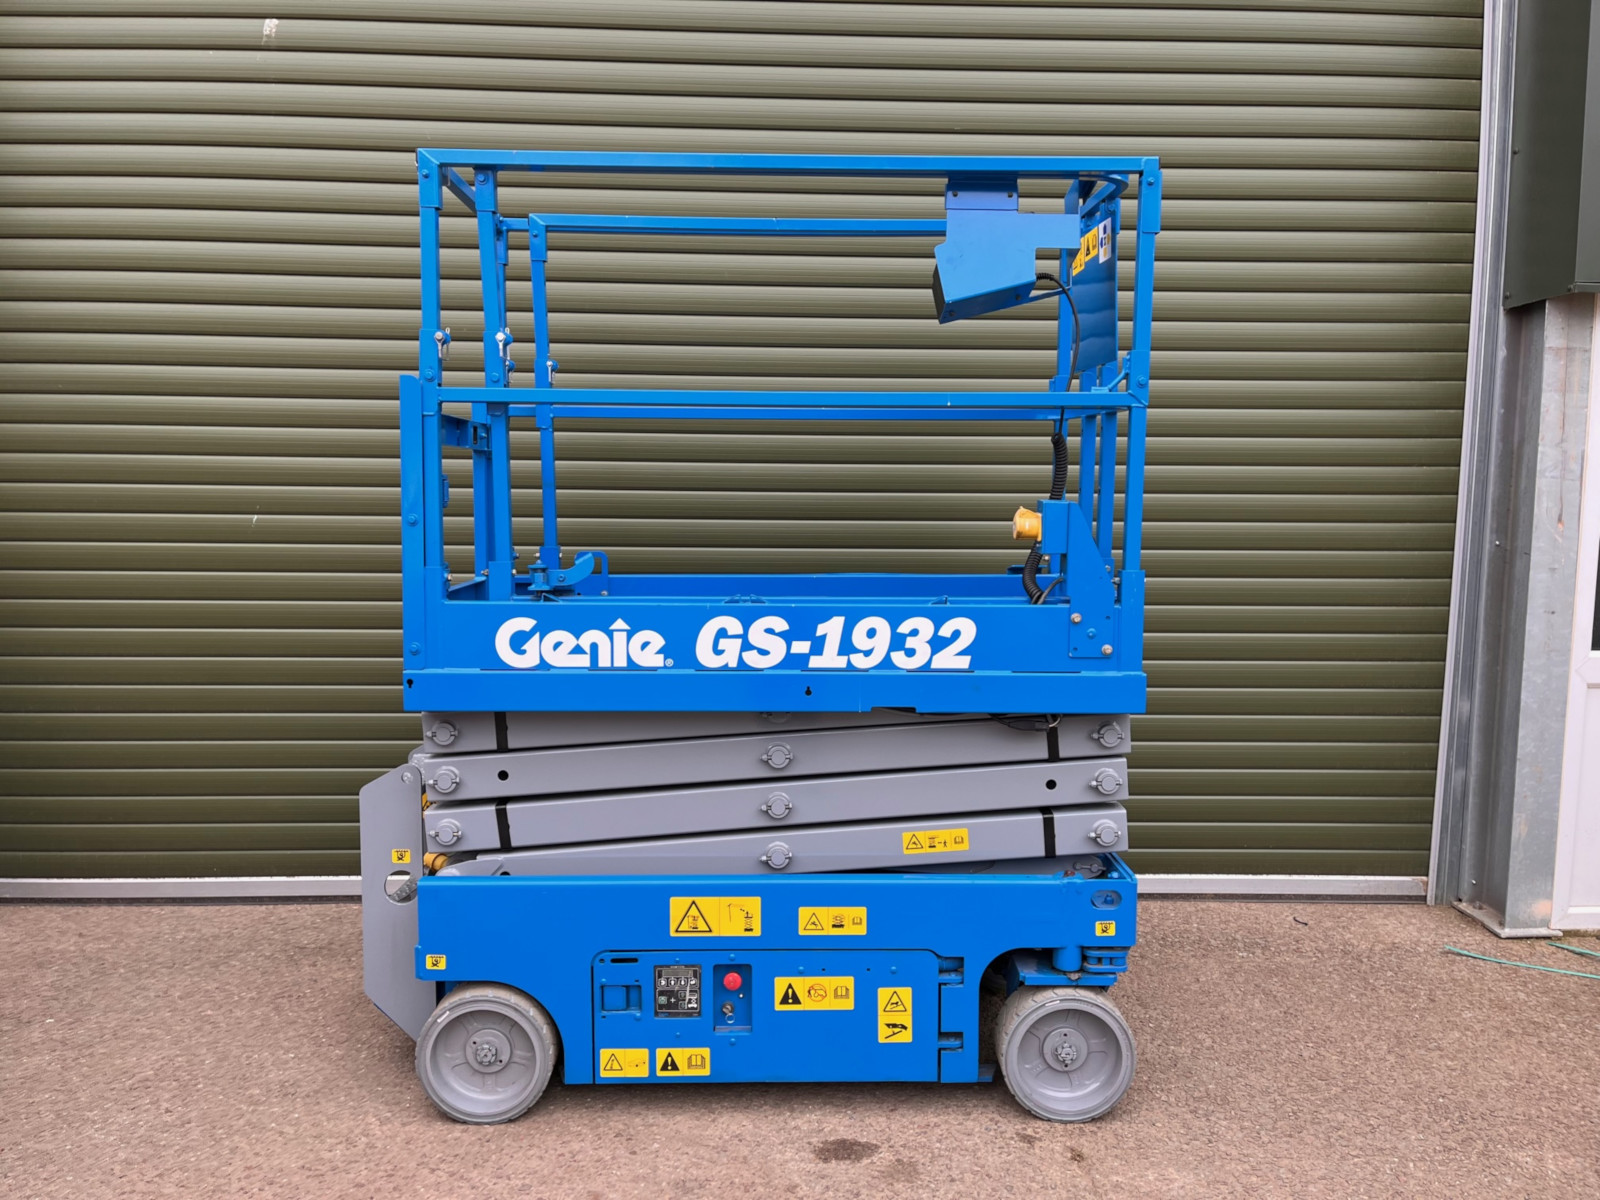 An image of 2013 Repainted Genie GS1932 DC Scissor Lift goes here.